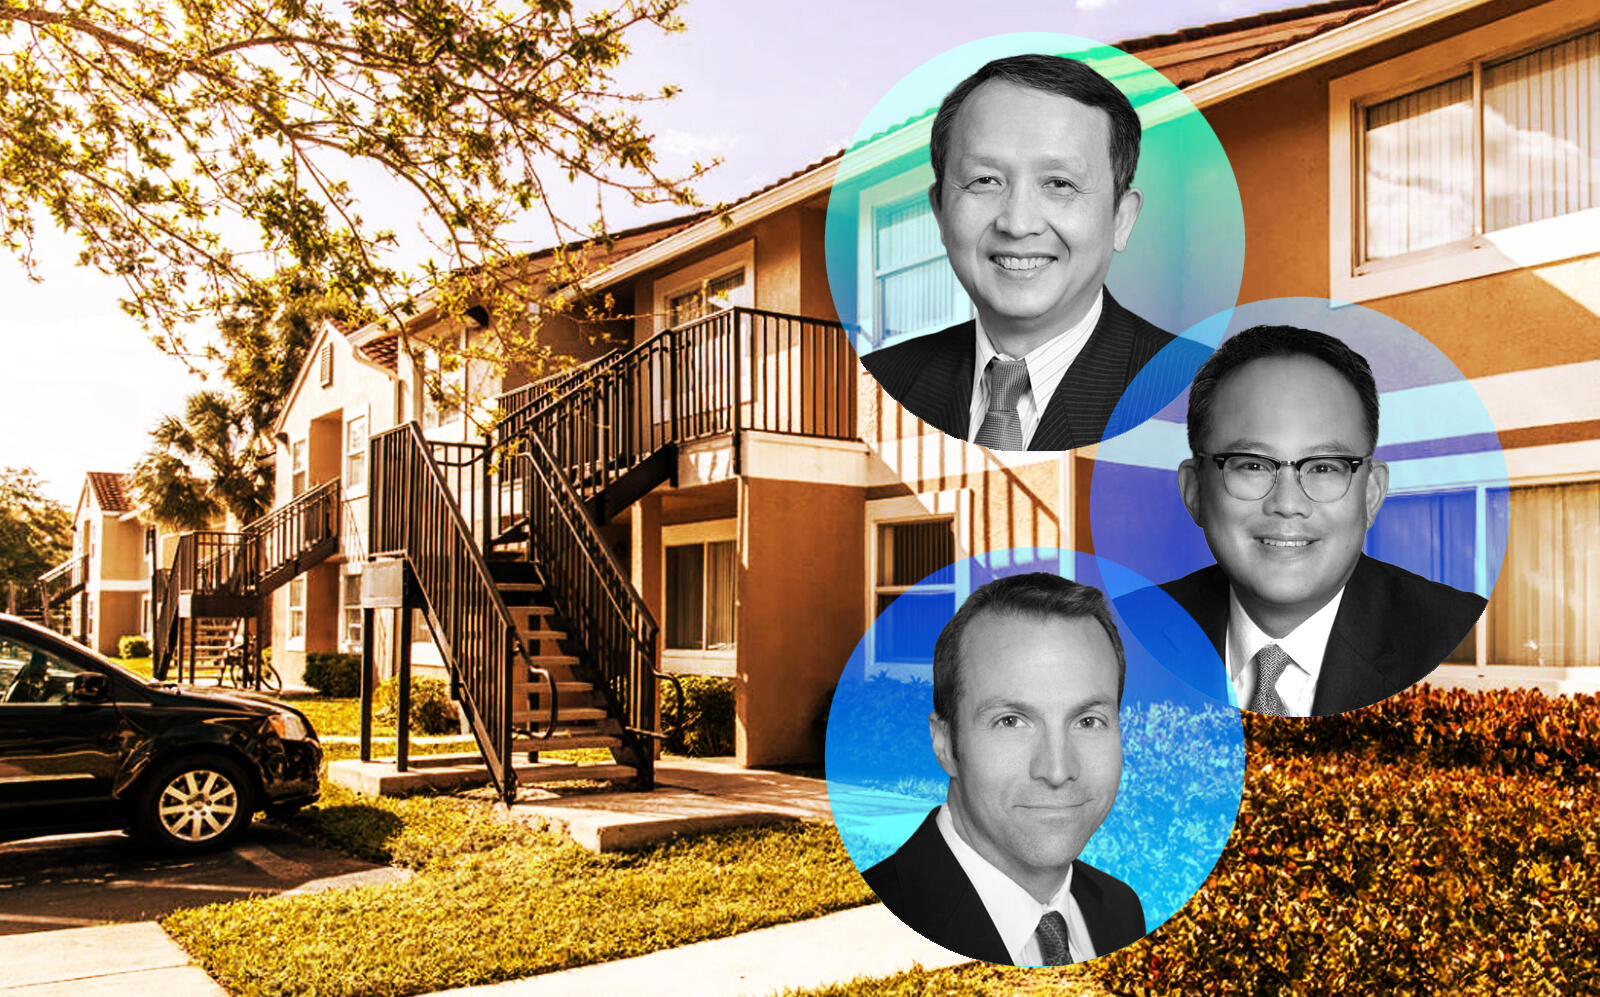 From top to bottom: Bascom Co-Founders and Principals Derek Chen, David Kim and Jerry Fink with the apartment complex (Bascom)